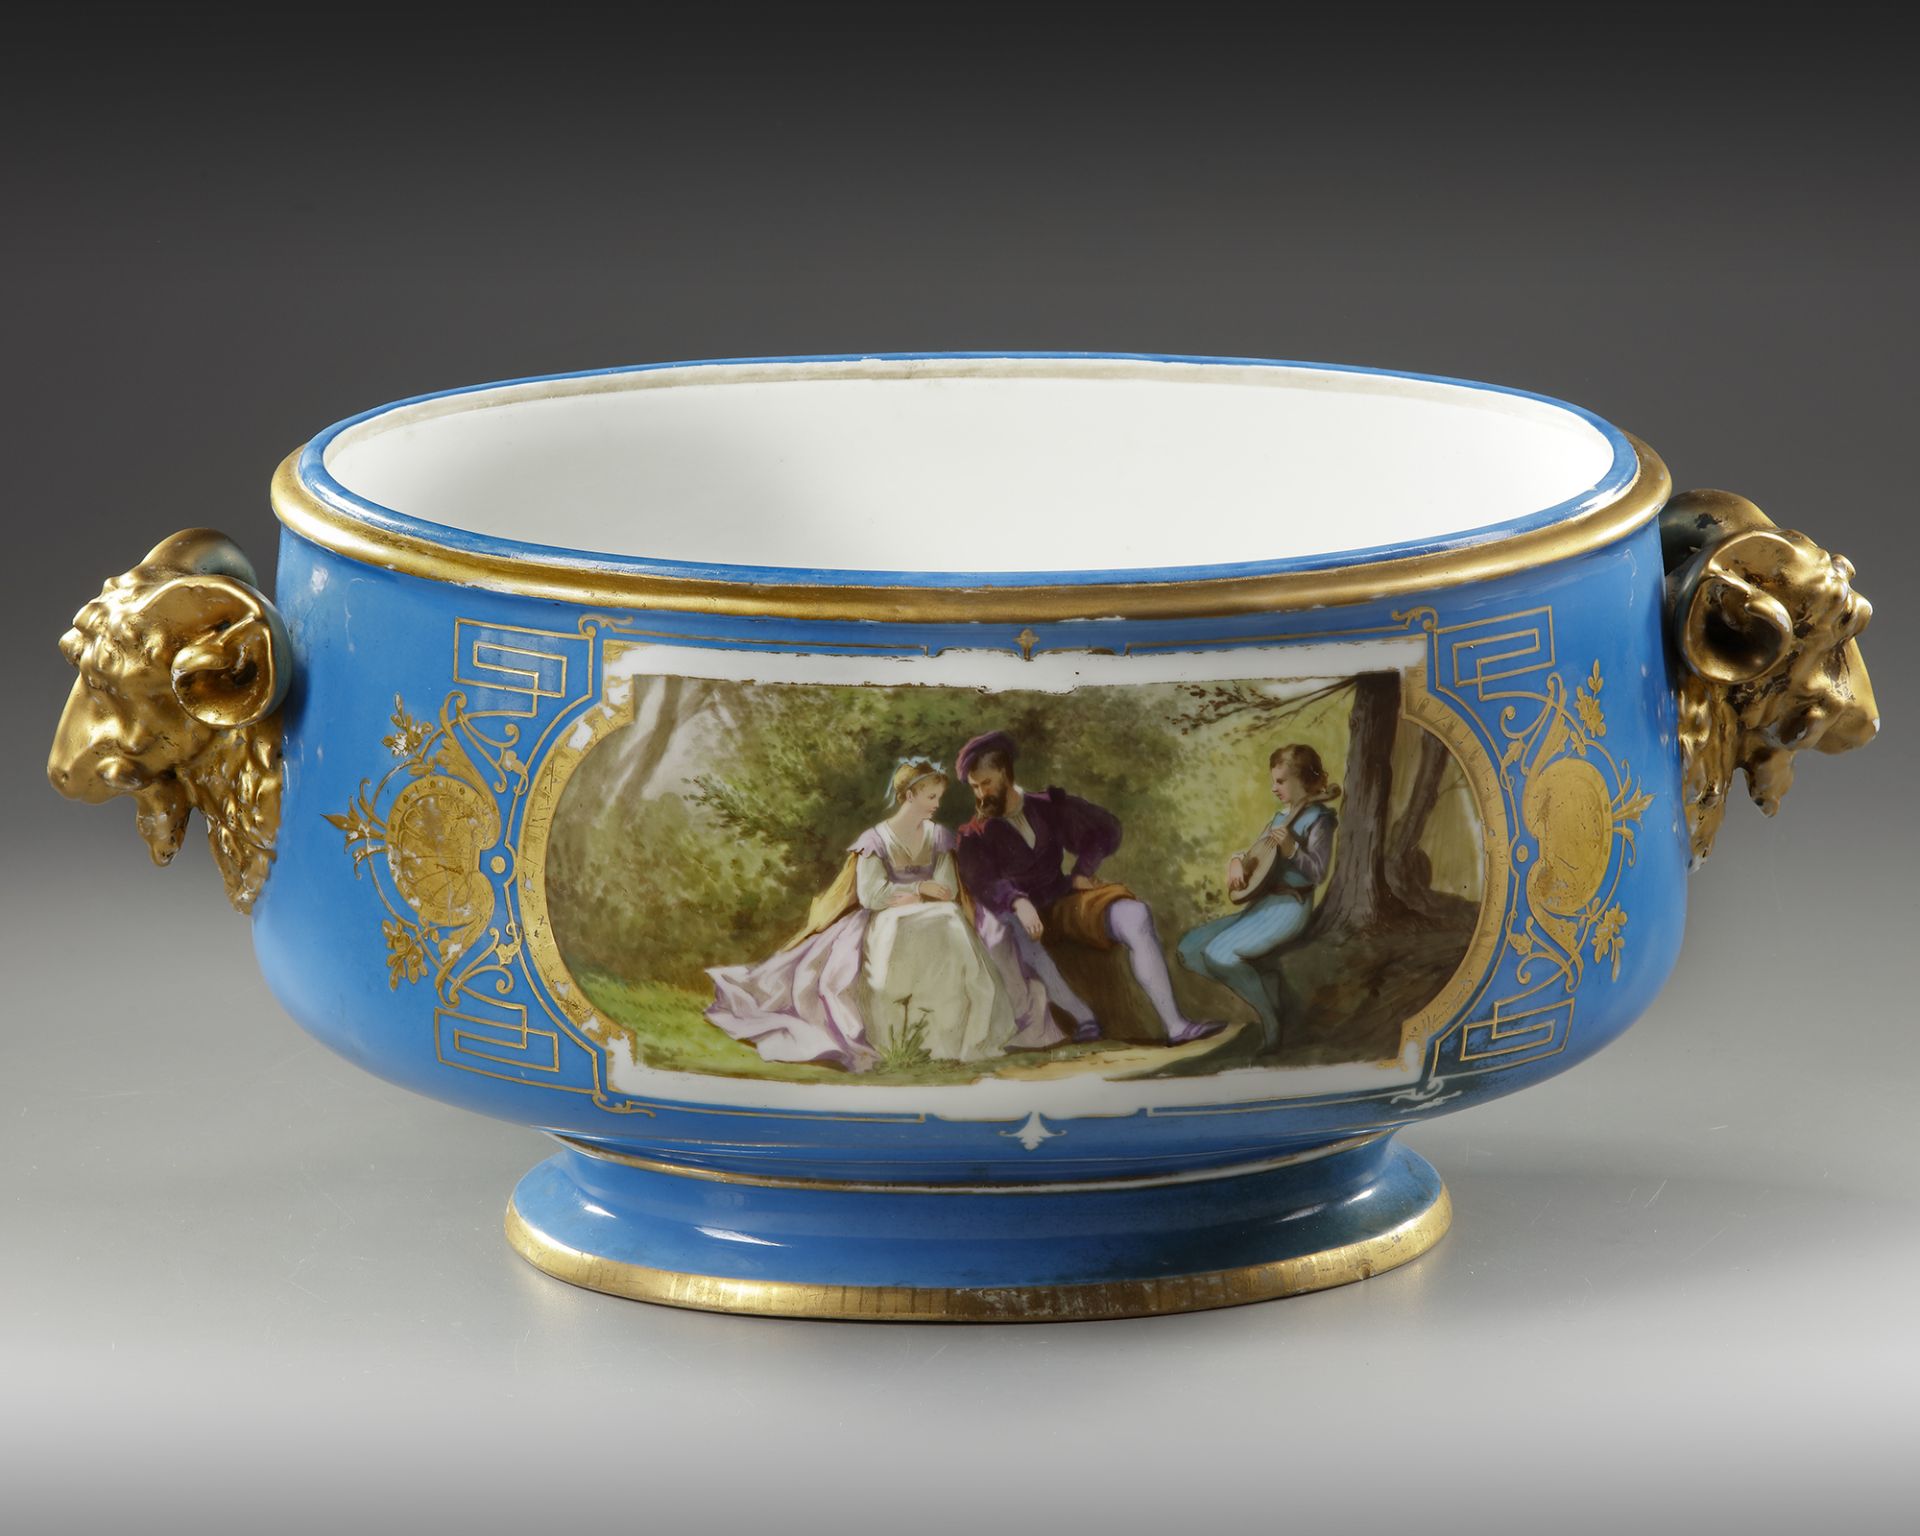 A FRENCH SEVRES PORCELAIN CUP, LATE 19TH CENTURY - Image 3 of 5